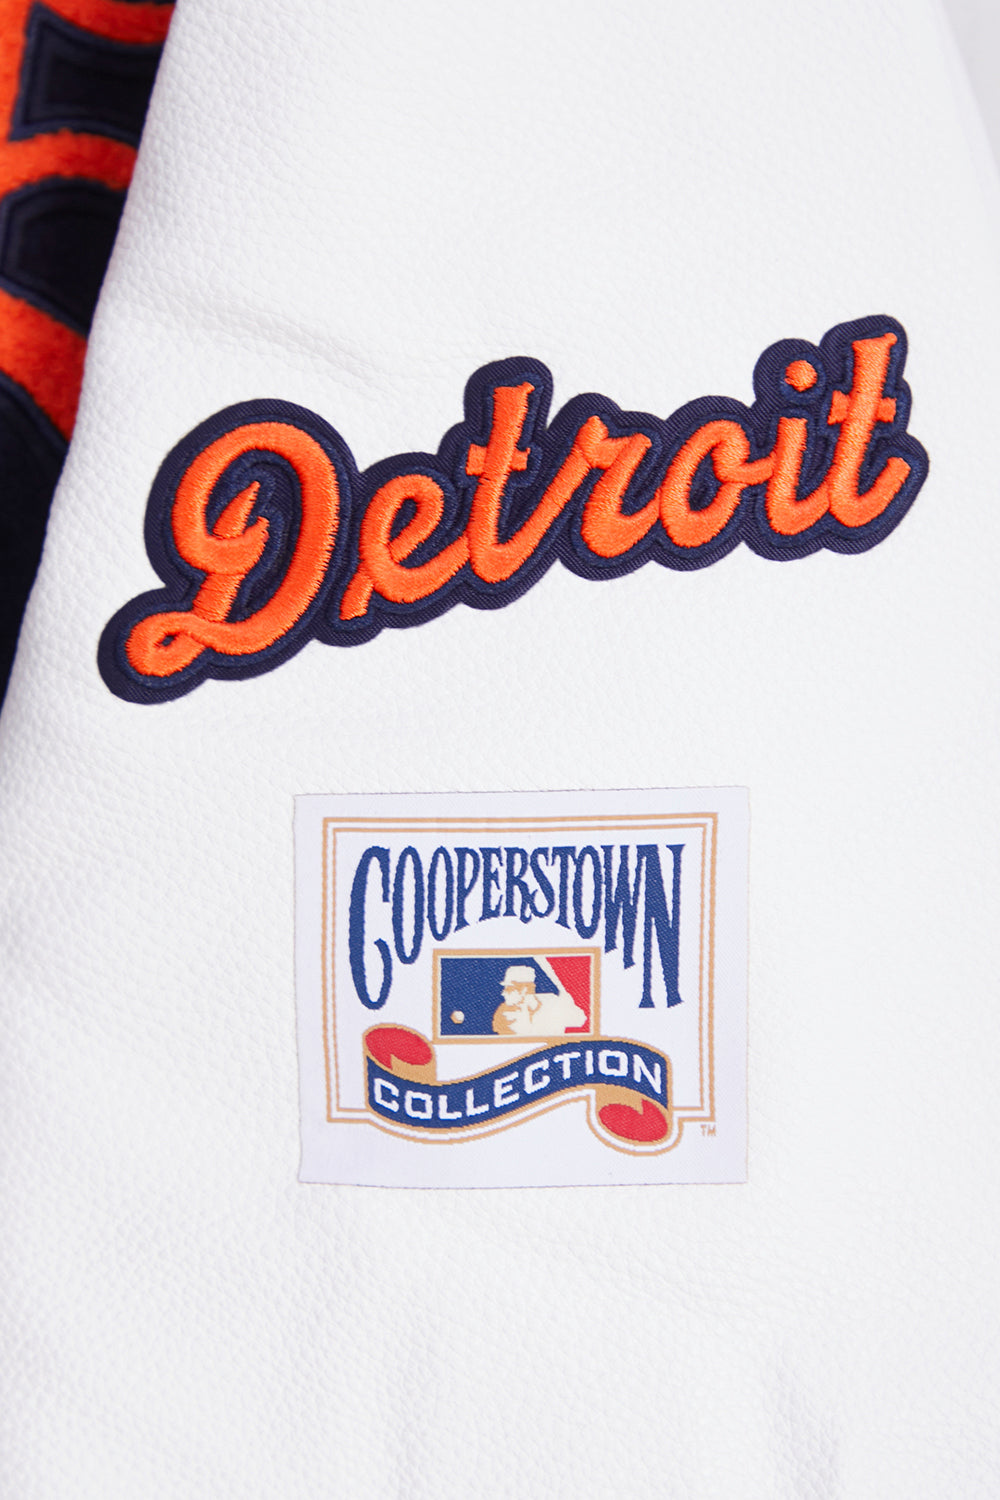 Pro Standard Navy Detroit Tigers Cooperstown Collection Retro